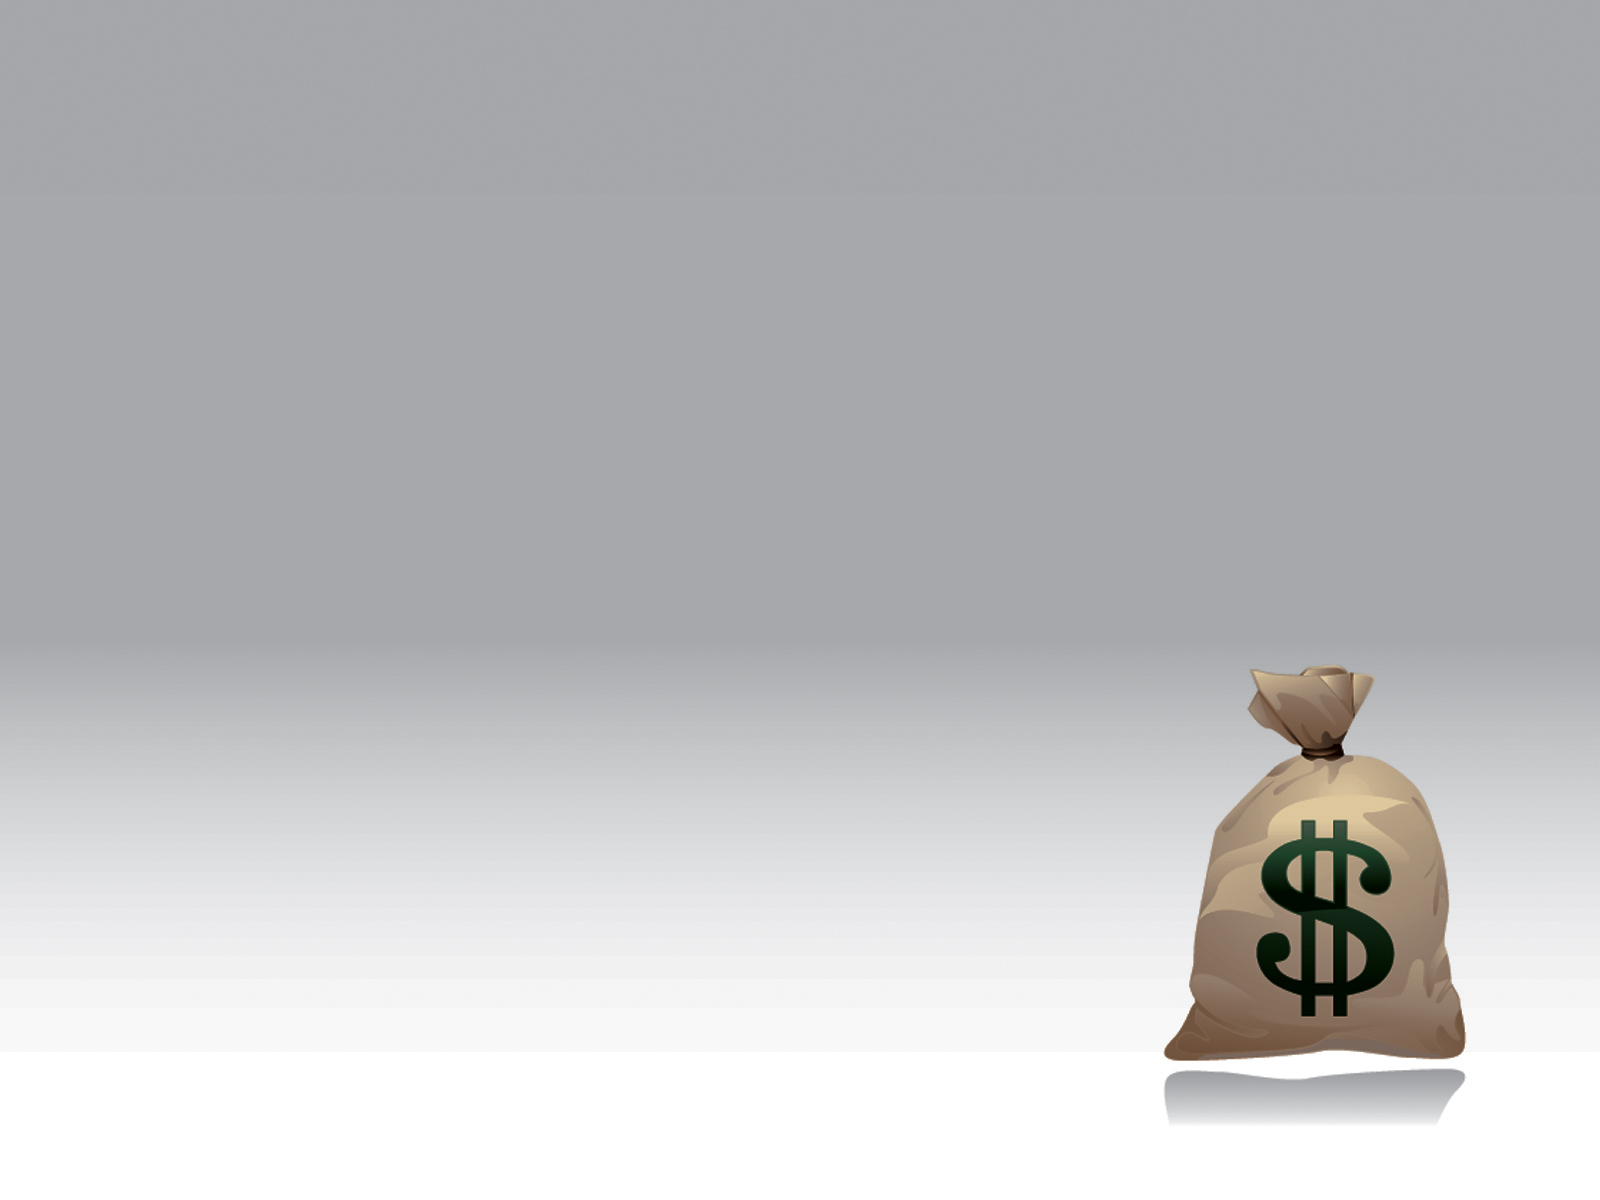 Purse and the cash box PPT Backgrounds